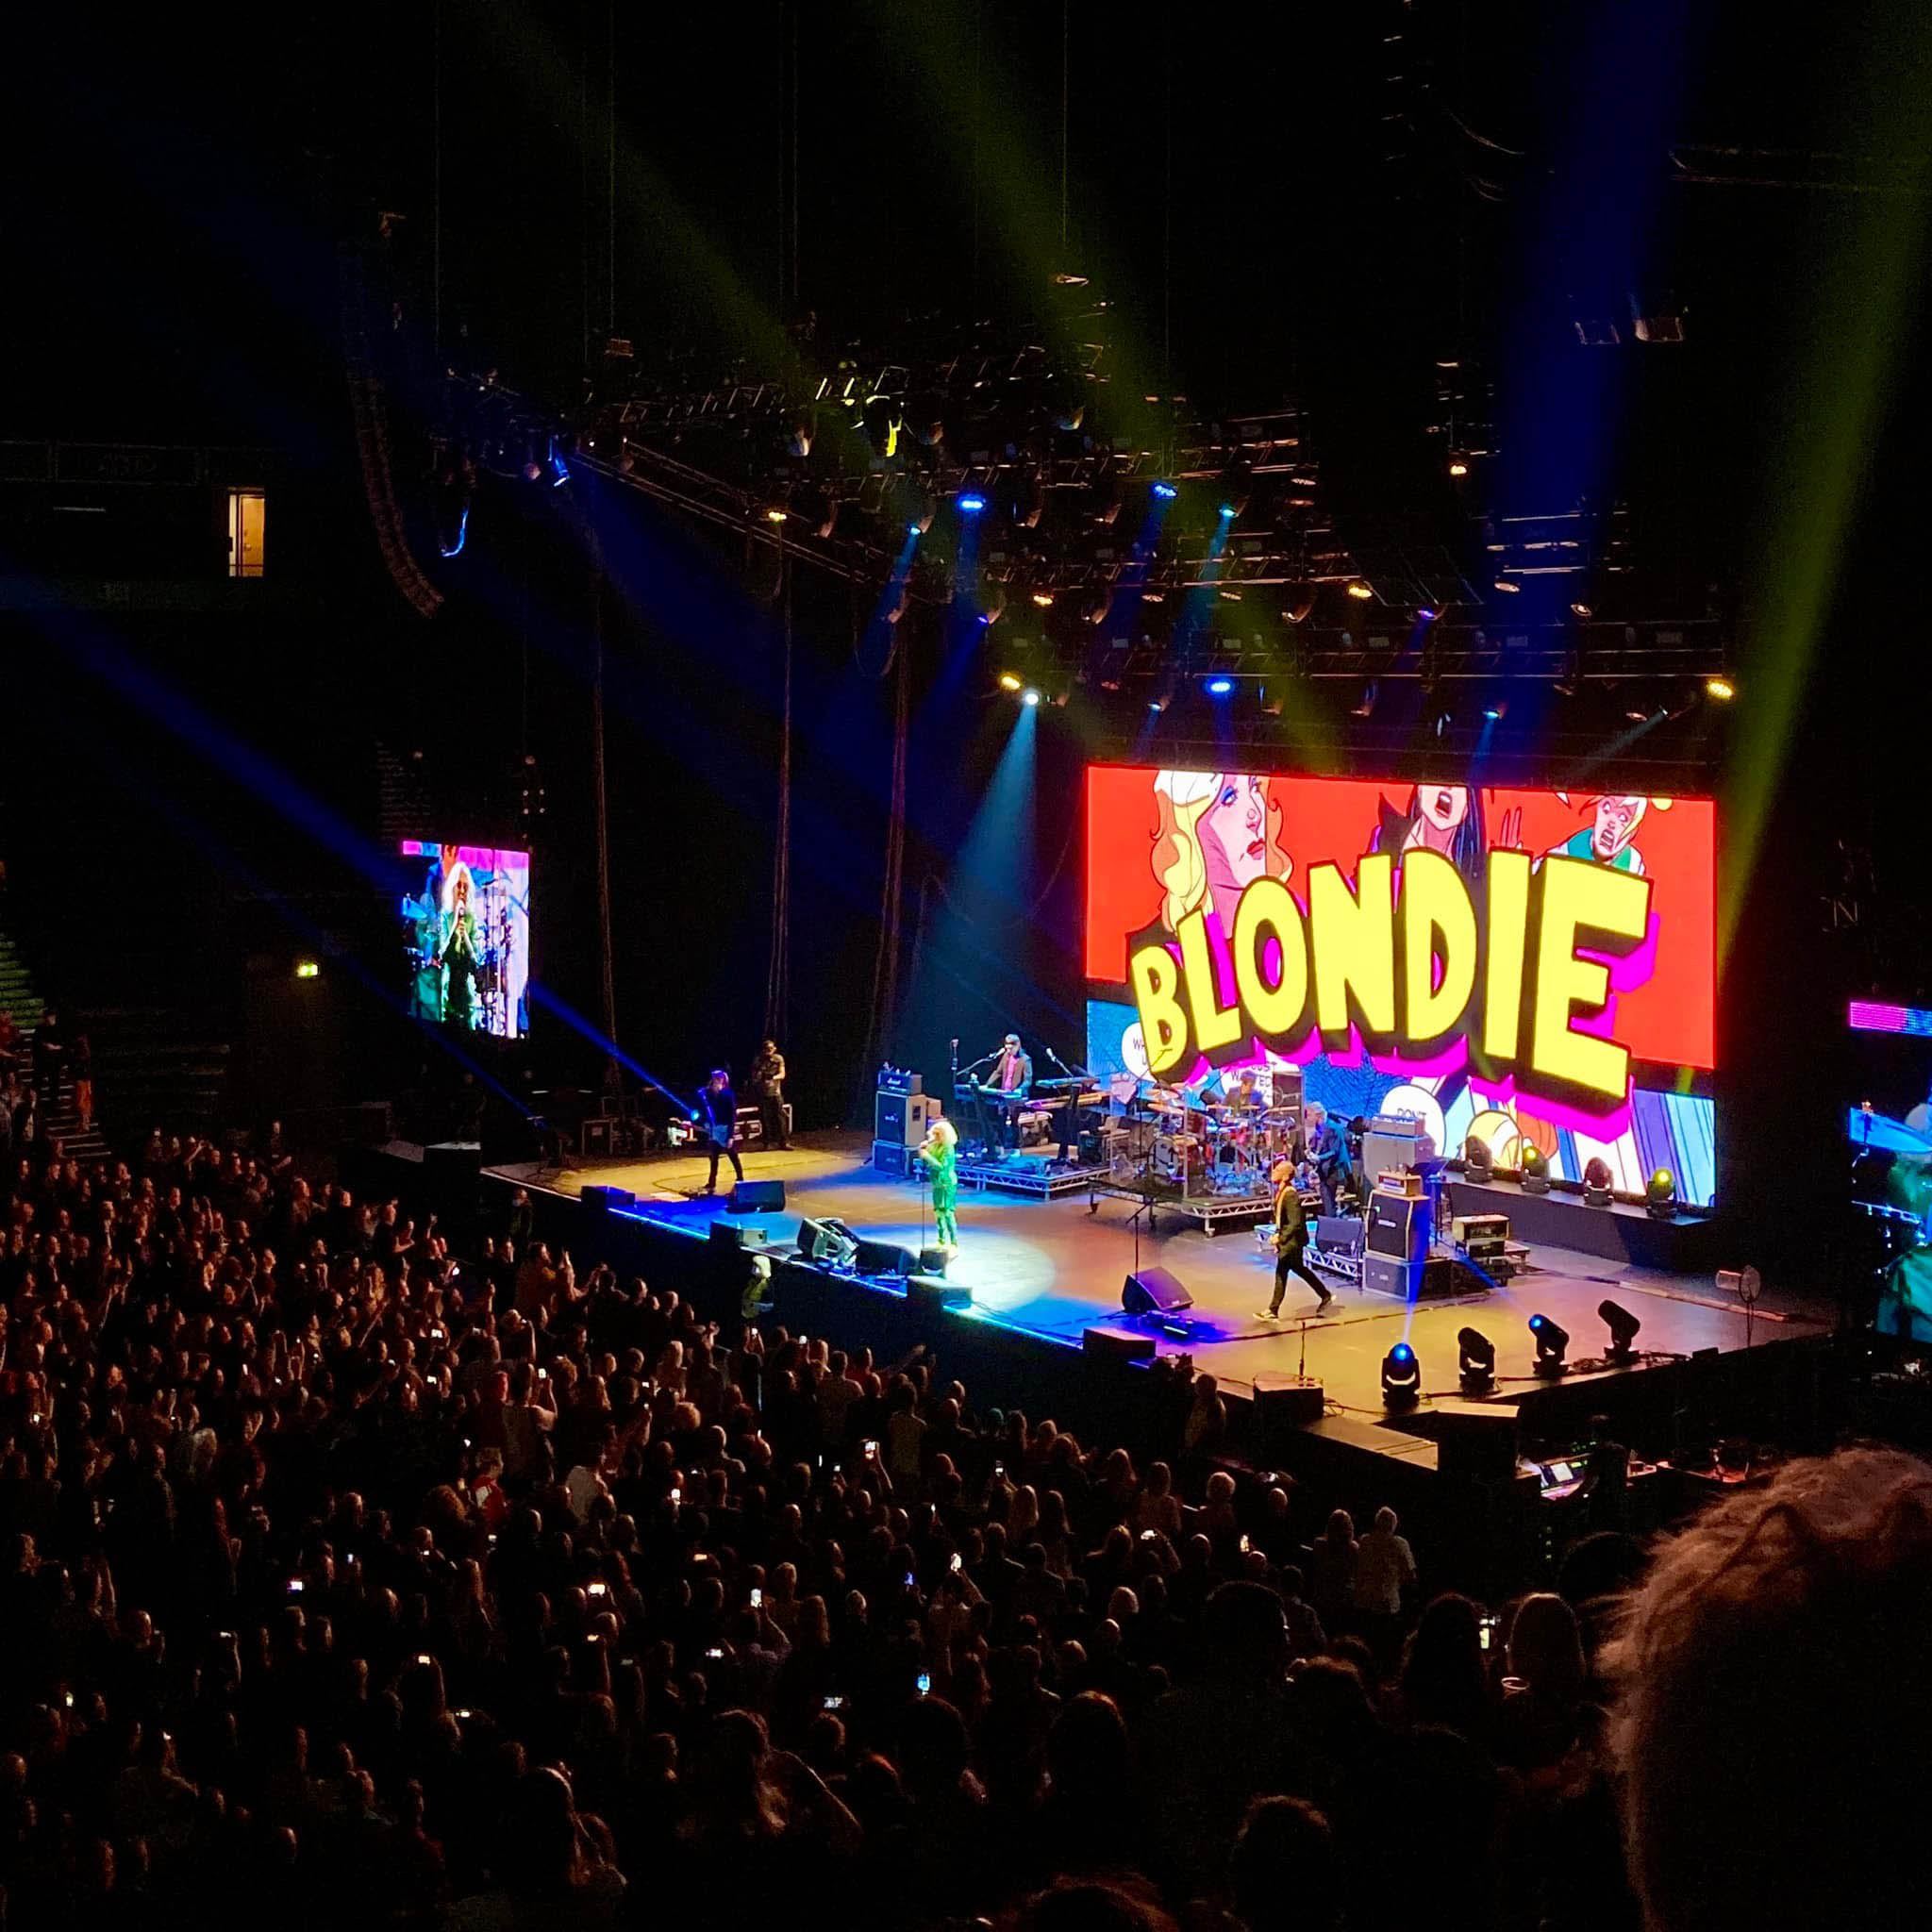 Watching Blondie live in Manchester, 2022 | By Kerwin